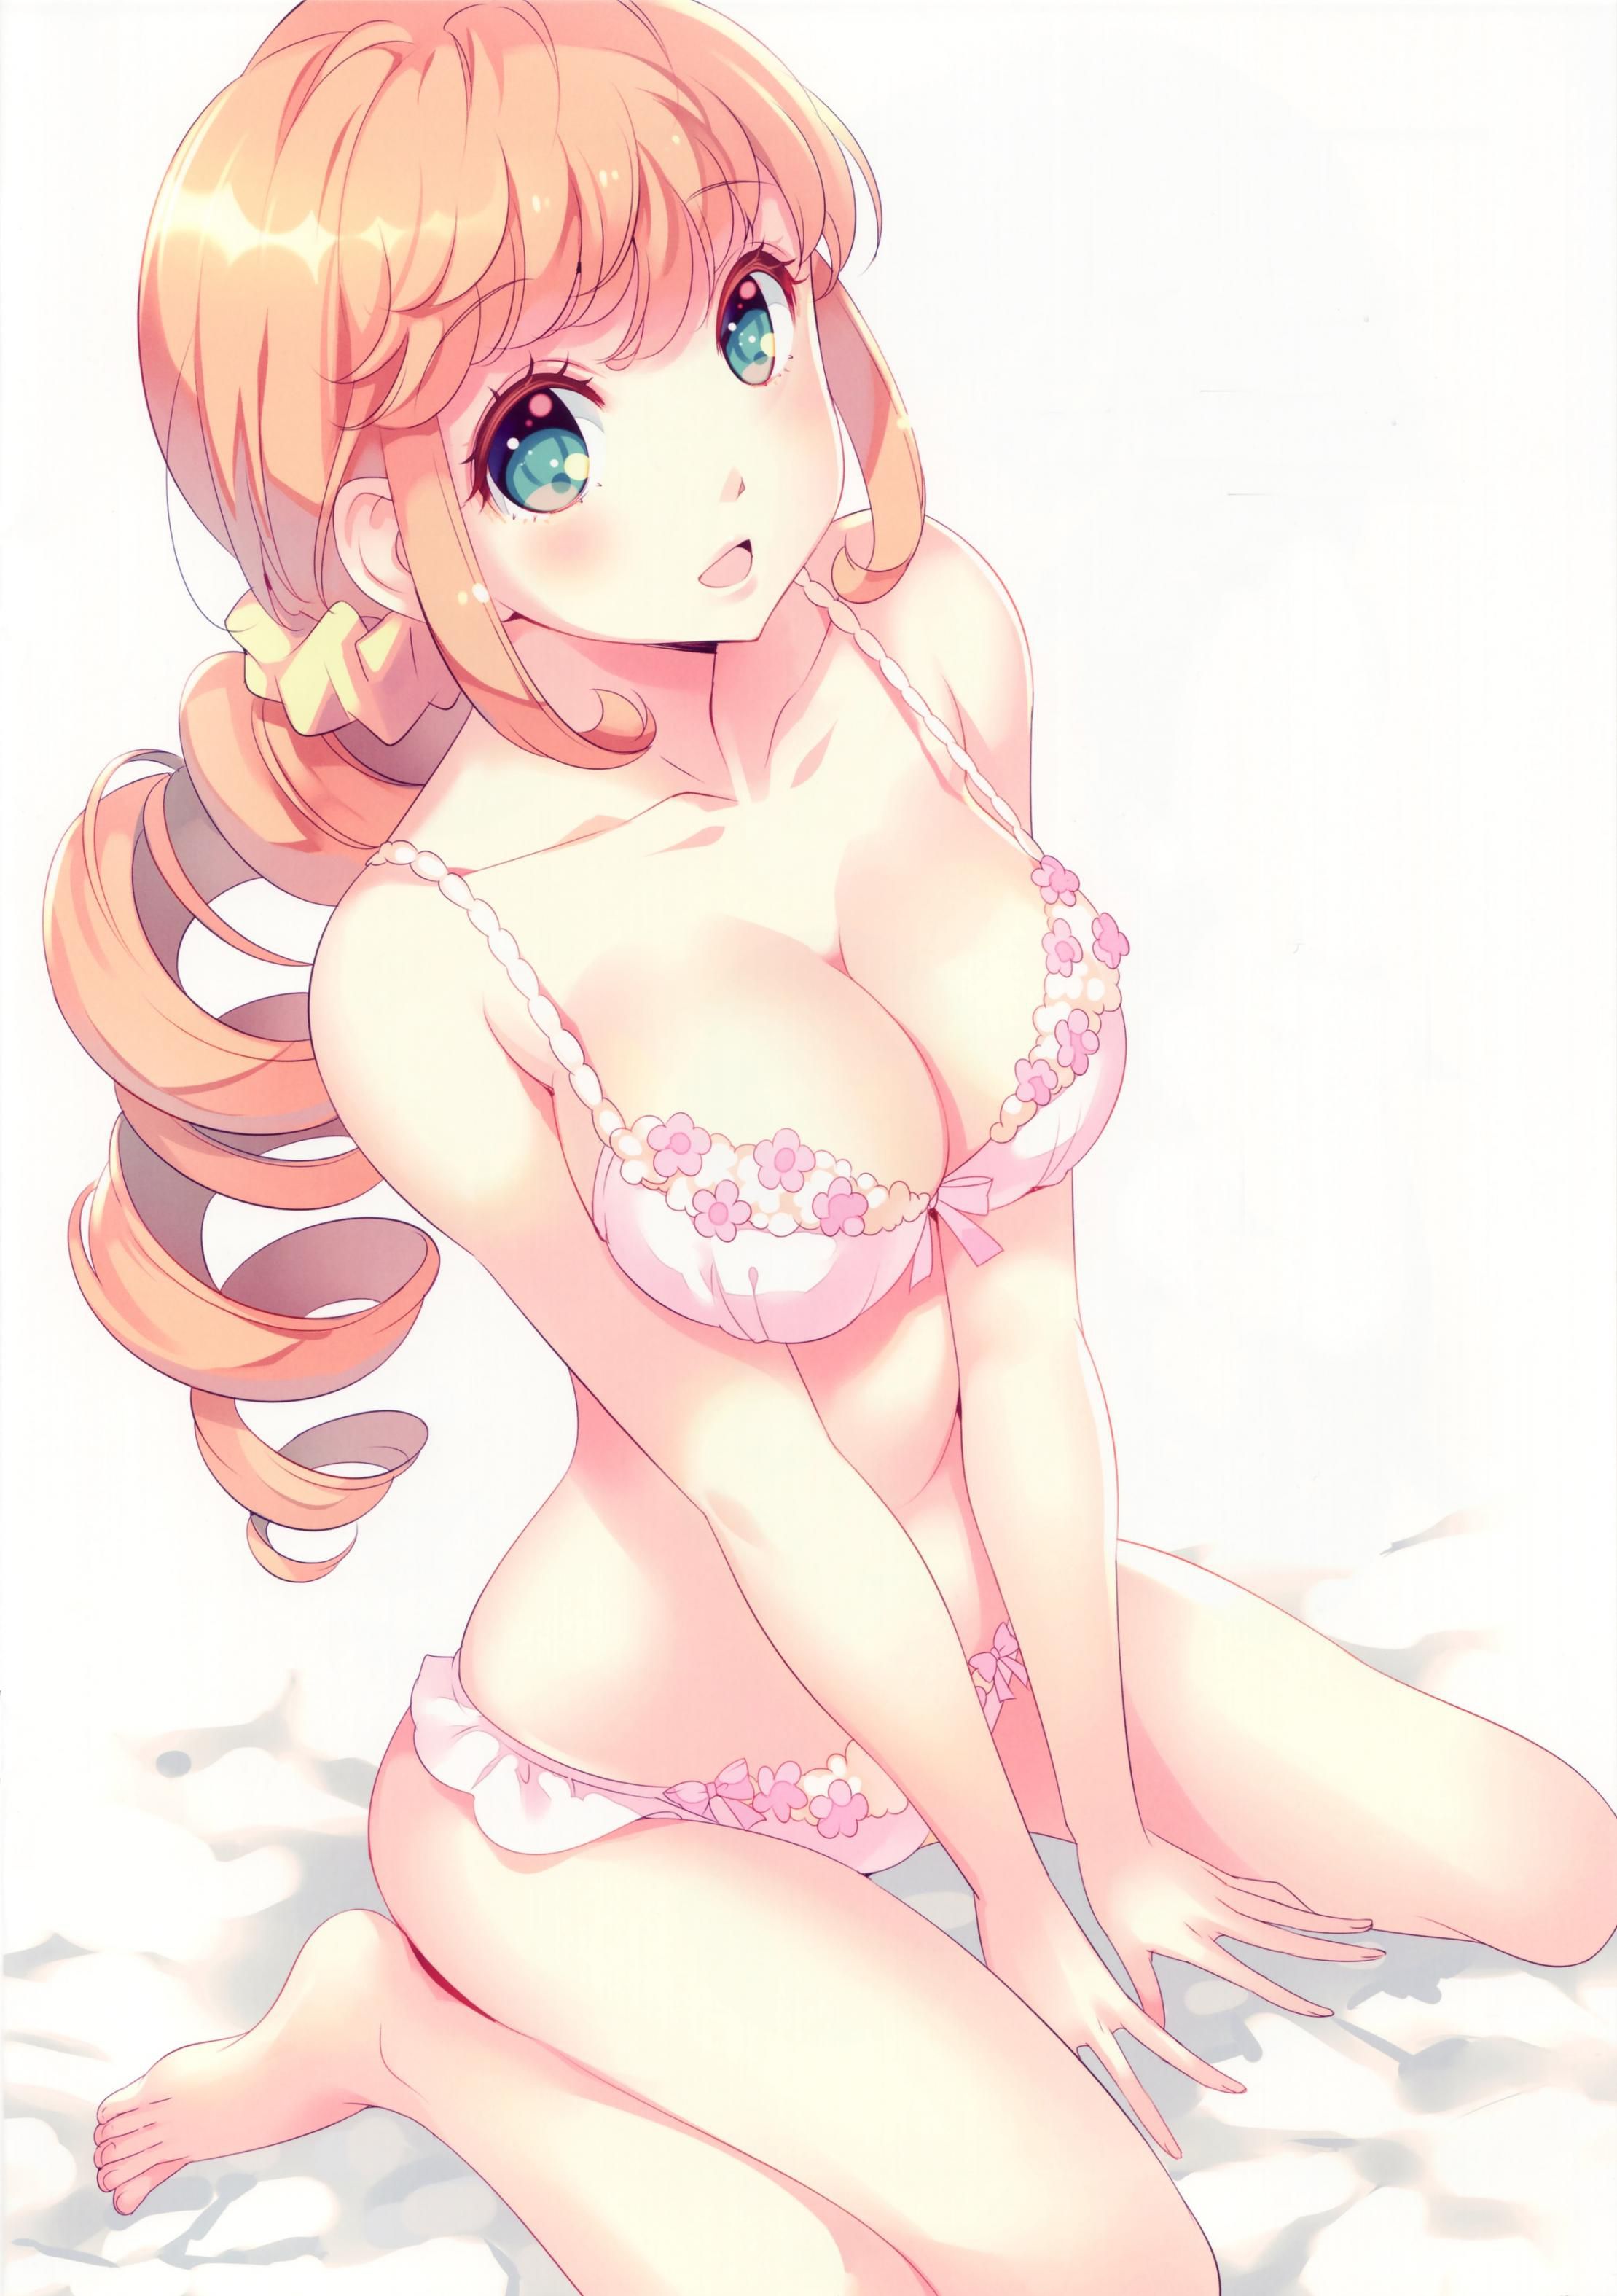 Naughty secondary image of a defenseless girl in underwear wwww 21